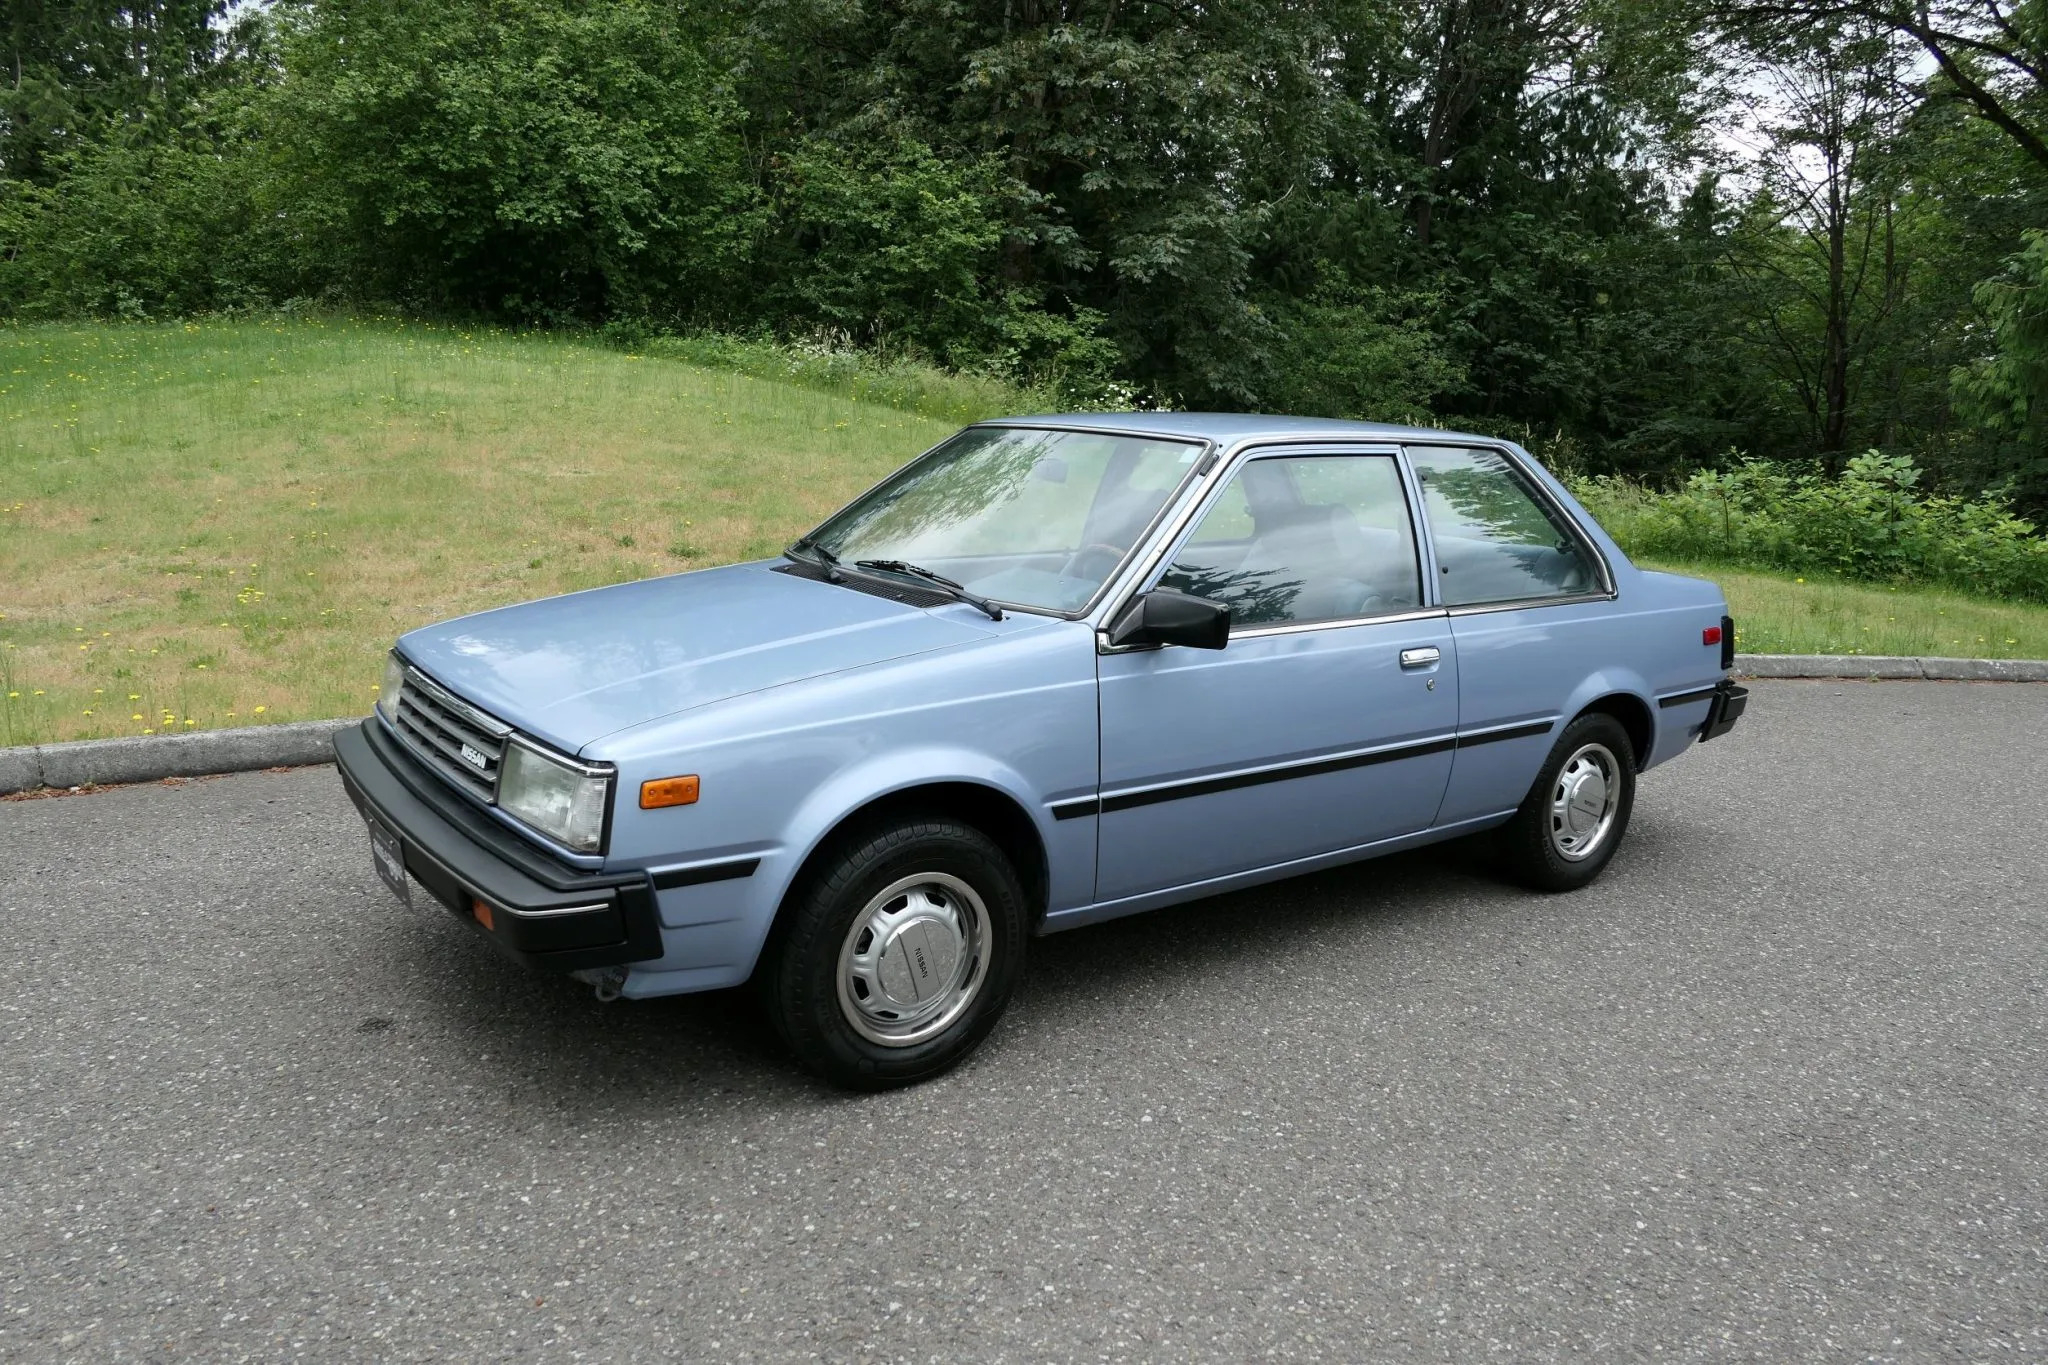 1986 Nissan Sentra Coupe